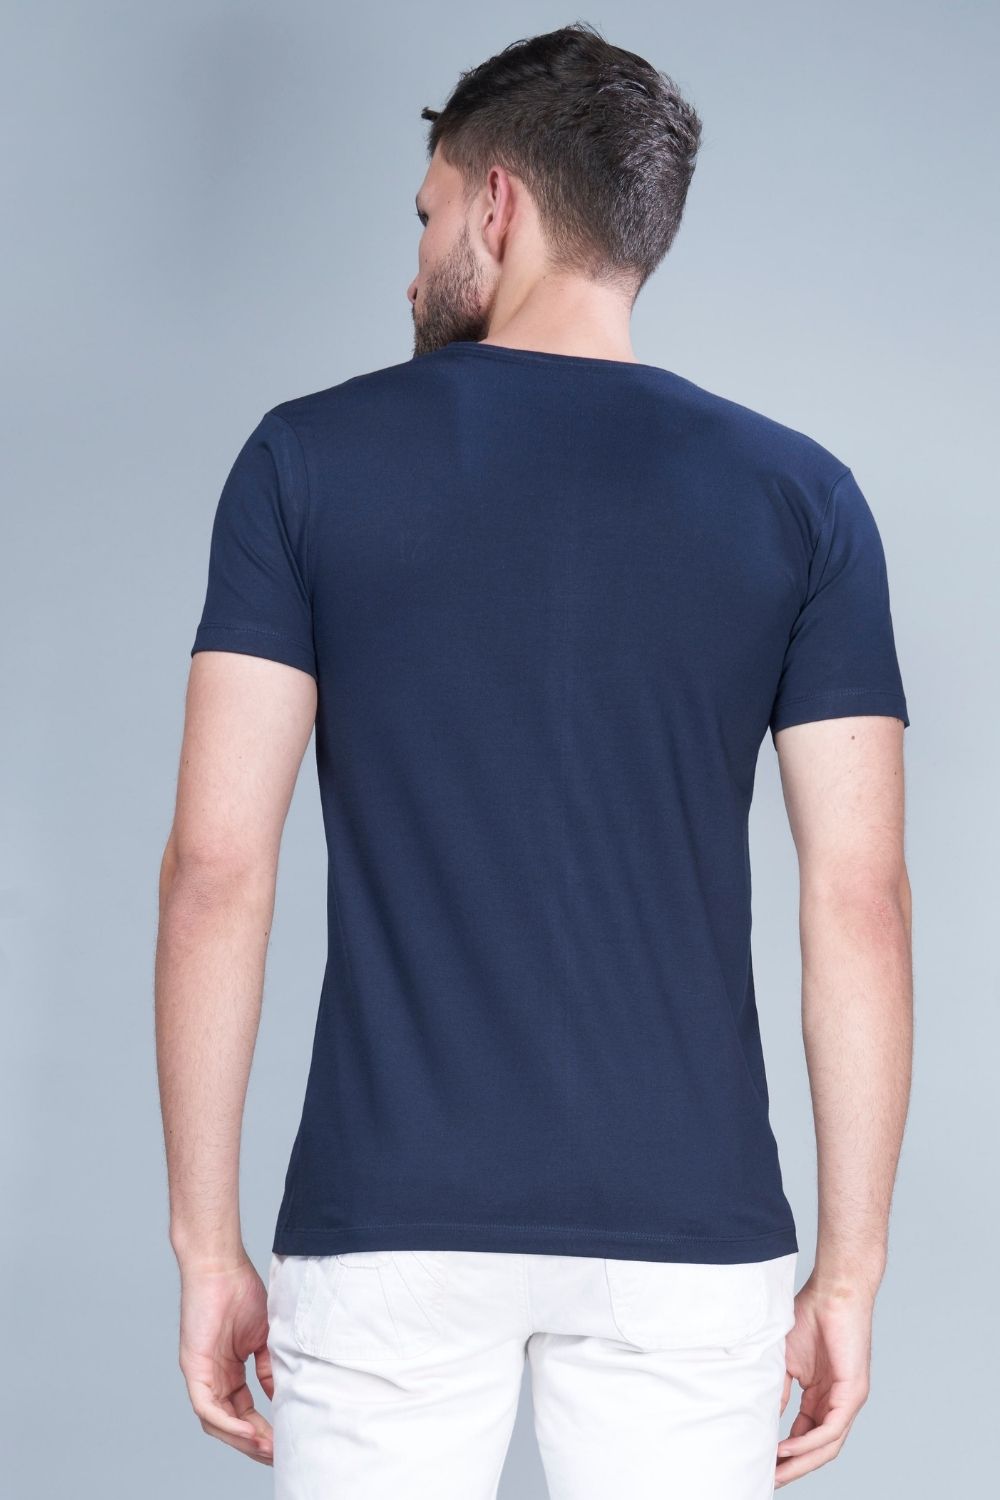 Teal Navy colored, solid t shirt for men with round neck and half sleeves, back view.